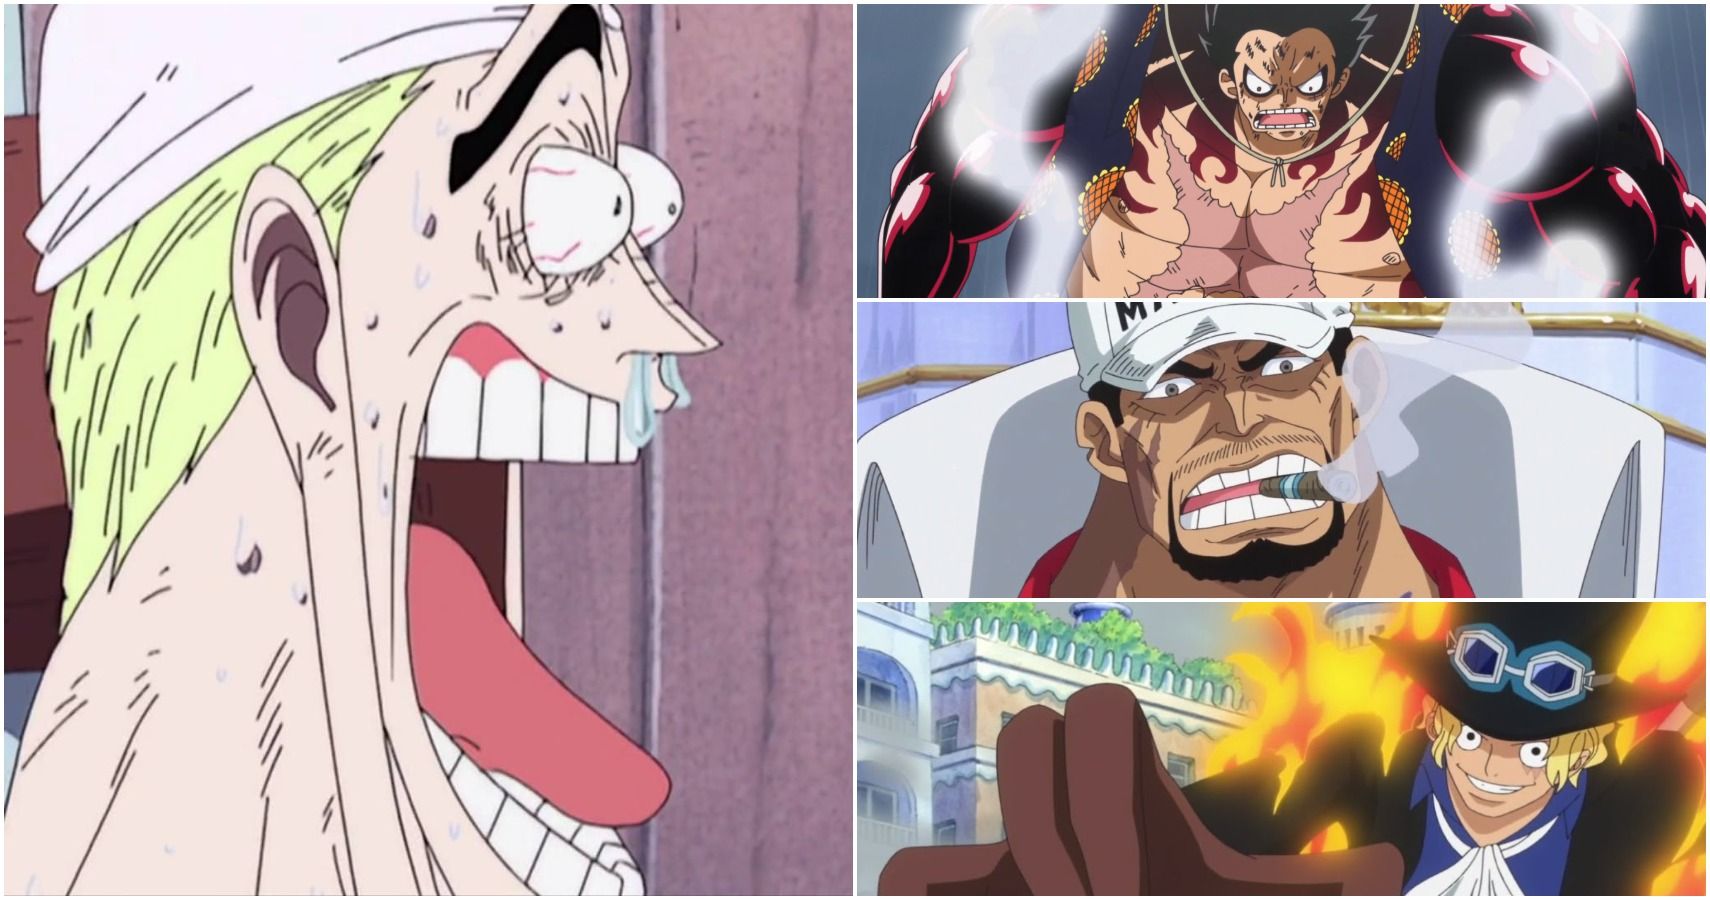 god power vs god power: rumble rumble fruit vs op op fruit, which is the  better godlike power to have and explain why? : r/OnePiece